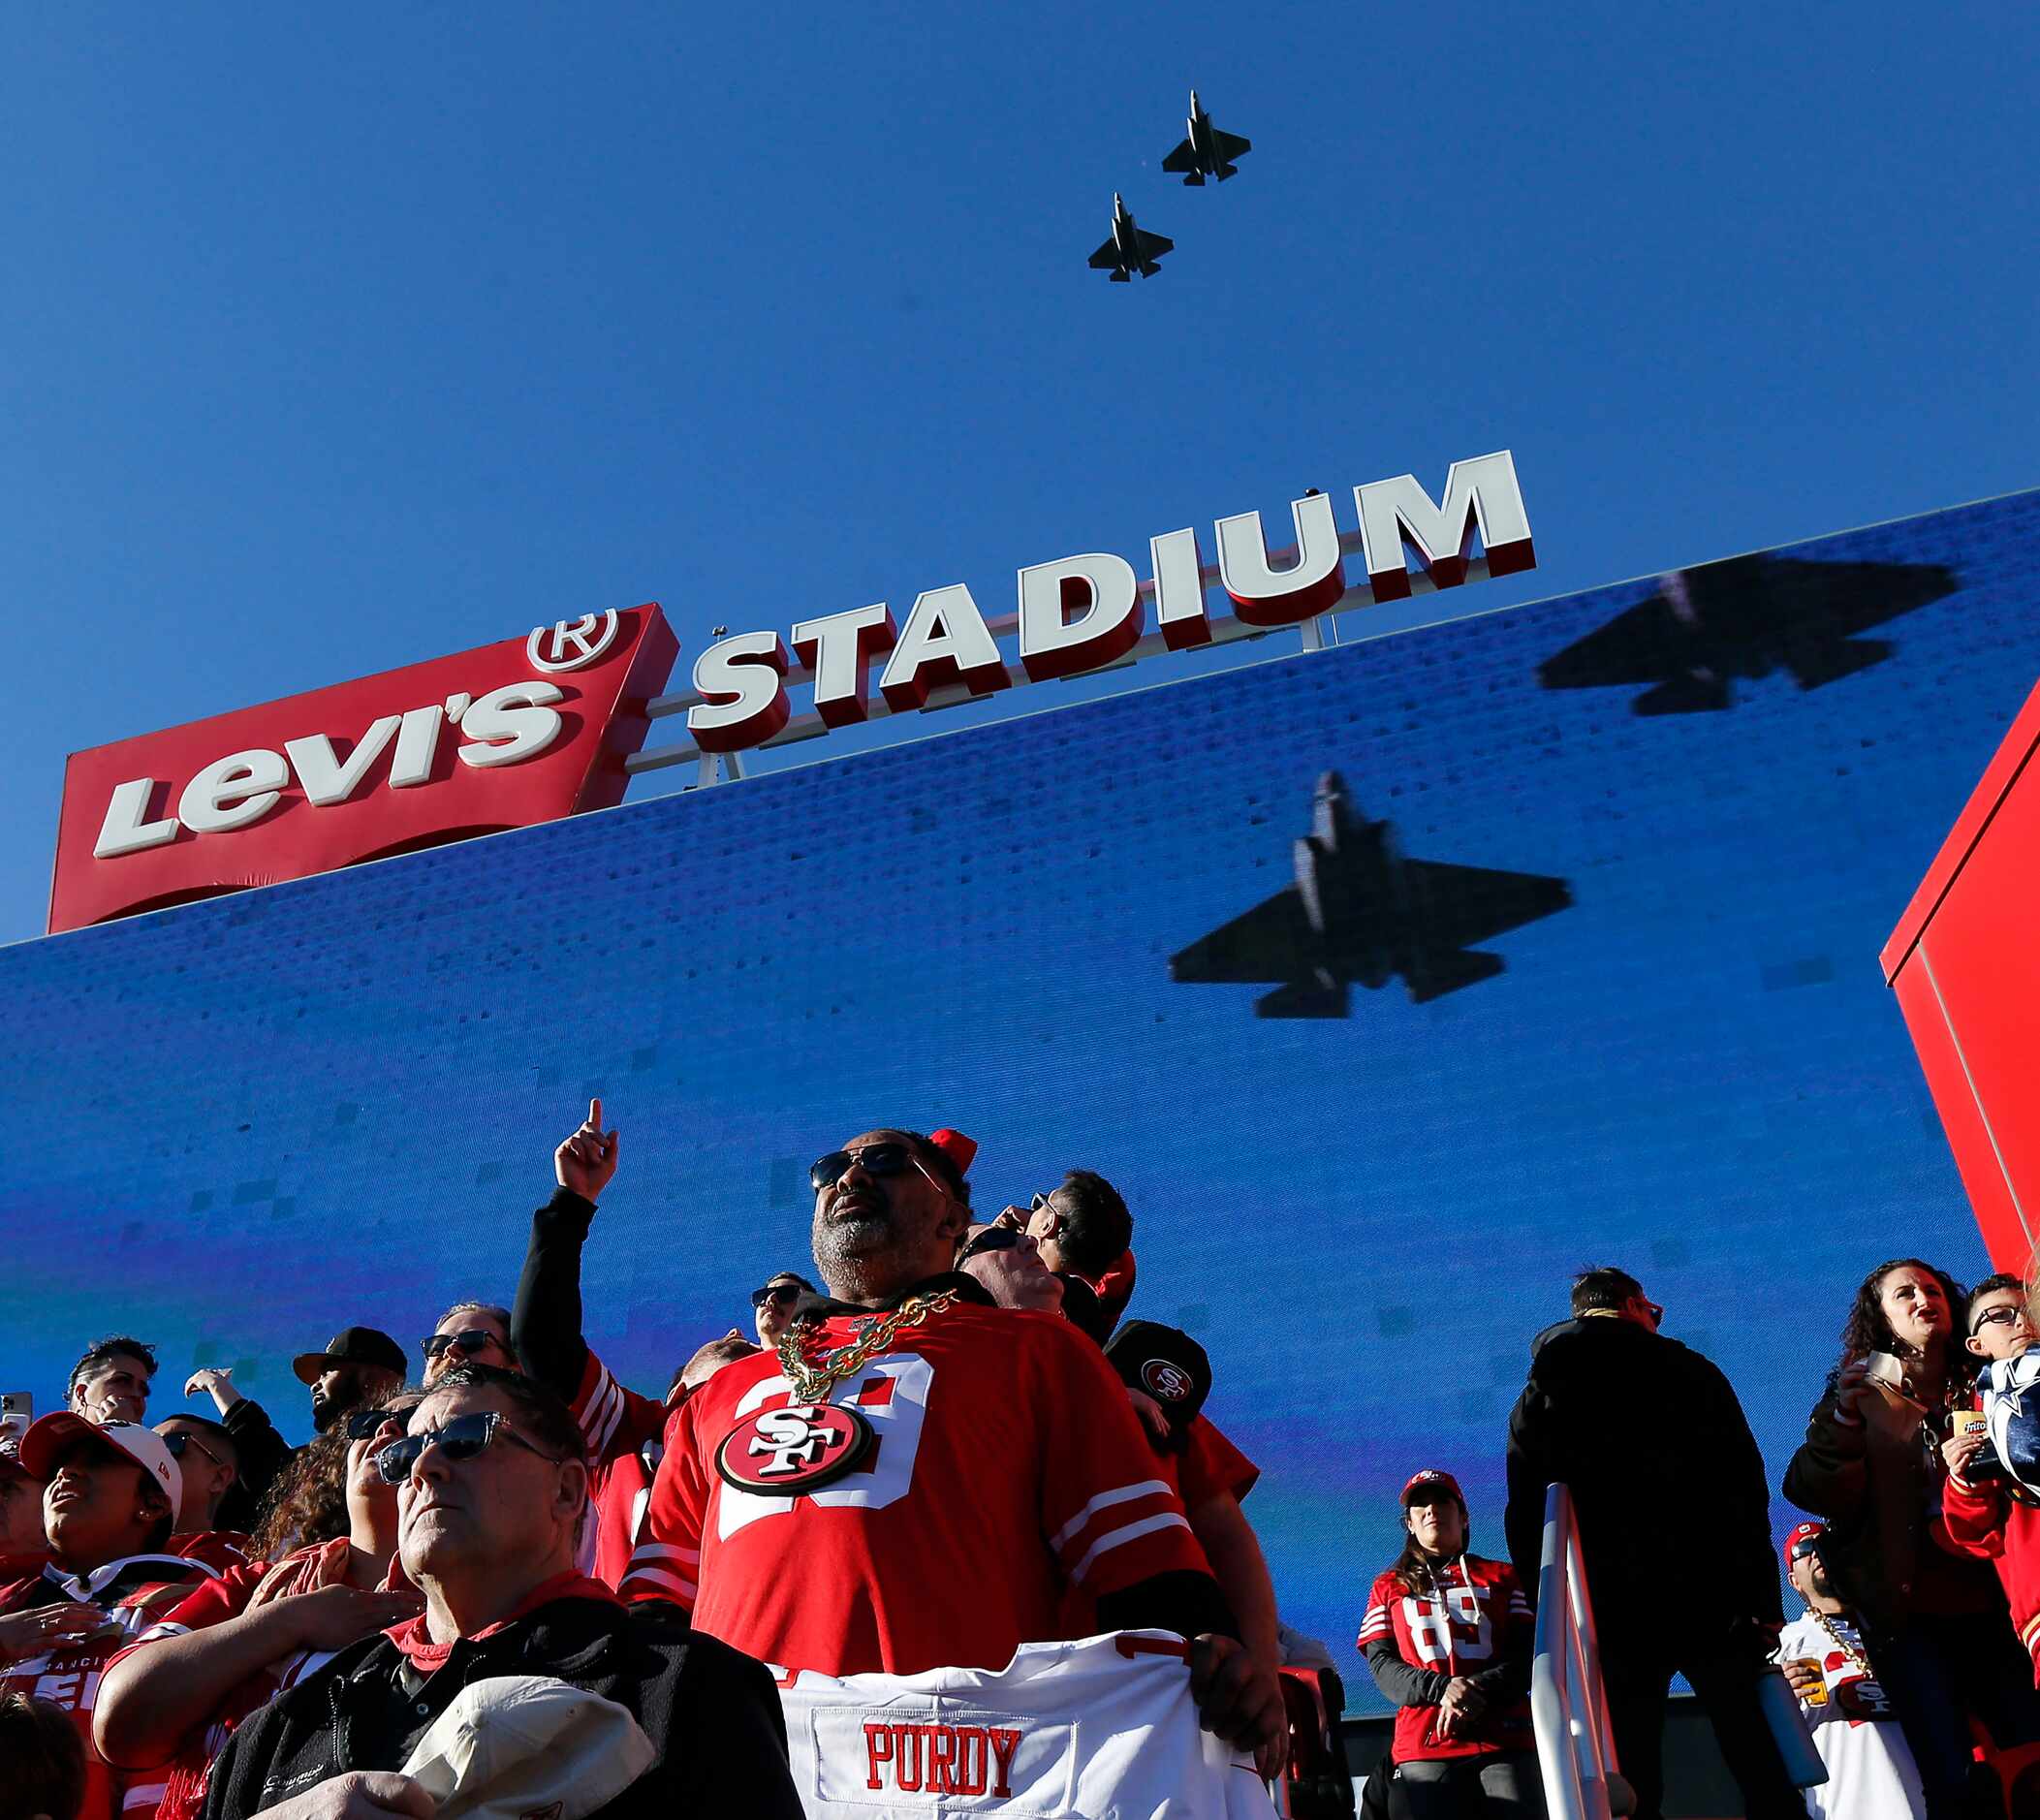 A pair of F-35C’s from the Naval Strike Fighter Squadron 147 perform the flyover of  Levi’s...